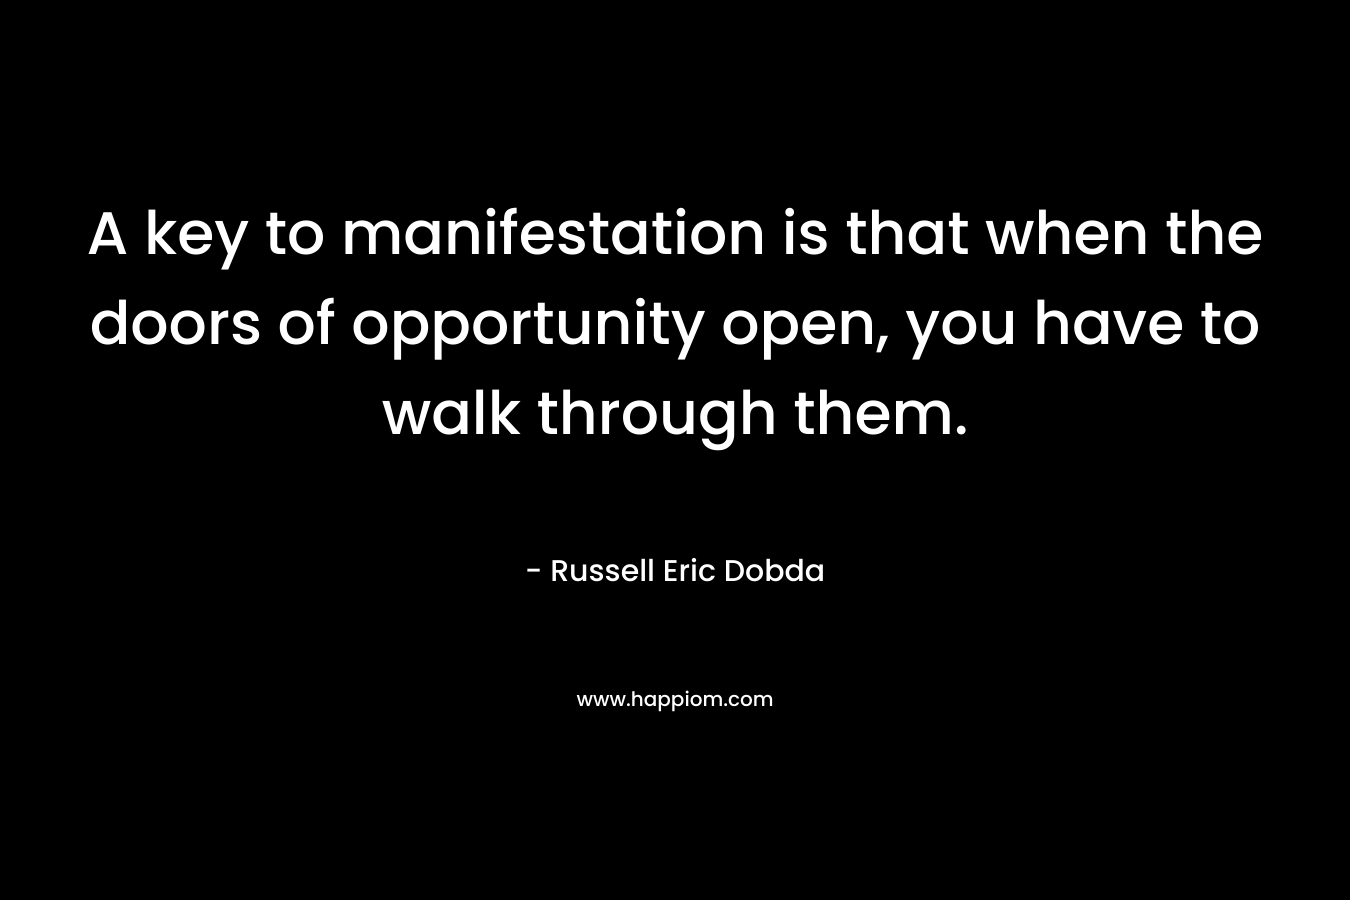 A key to manifestation is that when the doors of opportunity open, you have to walk through them. – Russell Eric Dobda